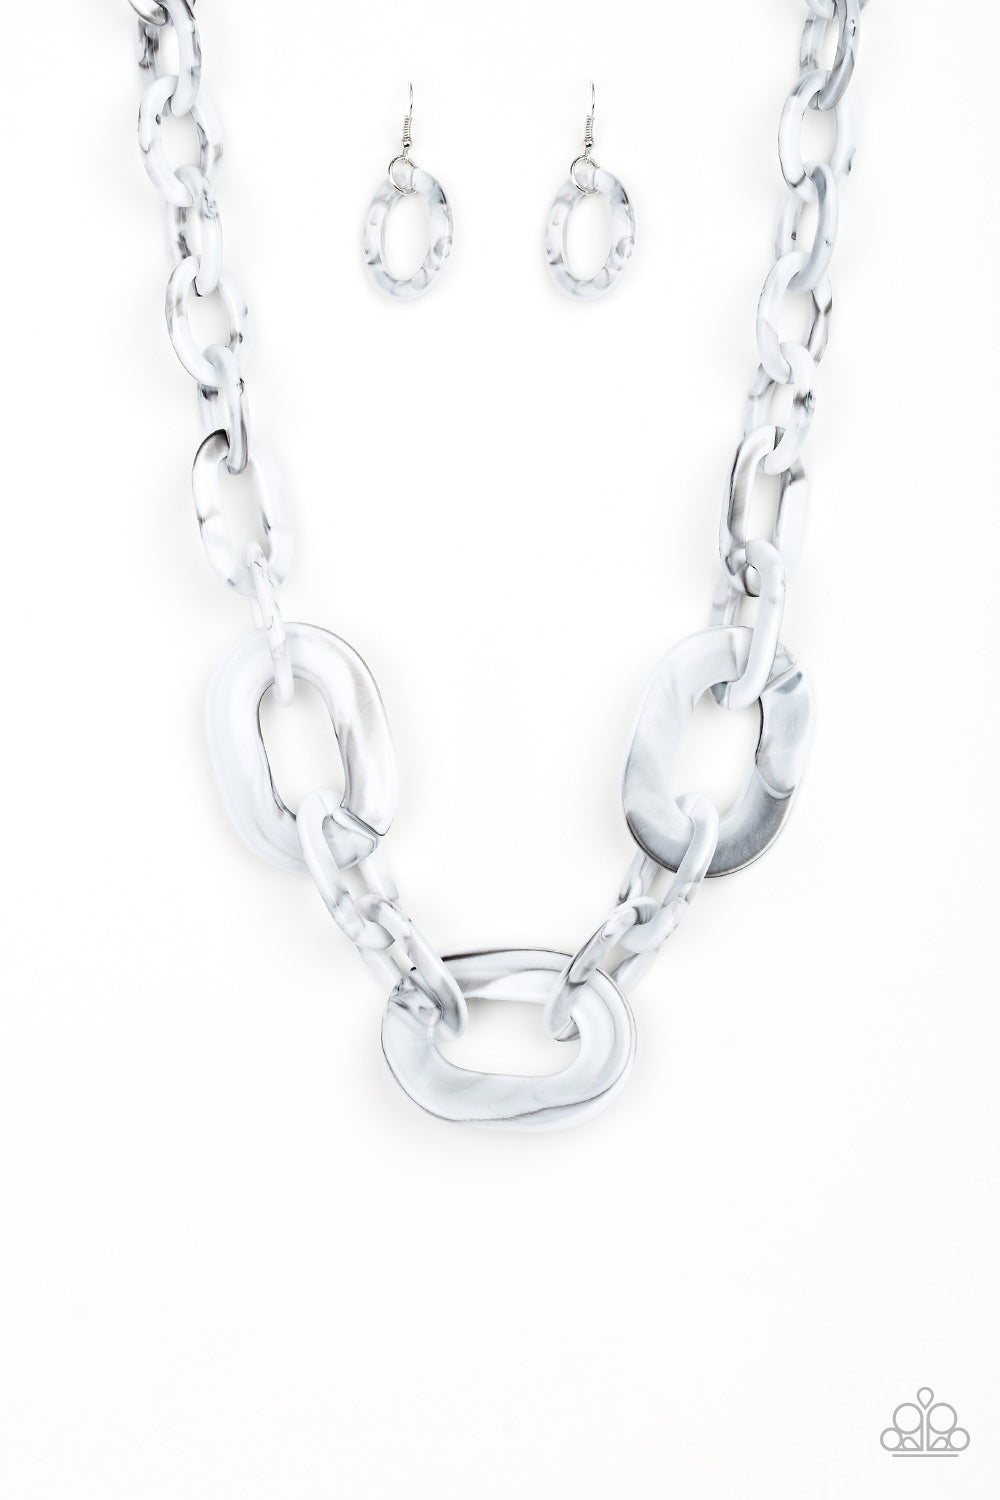 Paparazzi Accessories All in-VINCIBLE - Silver Necklaces brushed in a faux-marble finish, bold links connect below the collar for a statement making look. Features an adjustable clasp closure.  Sold as one individual necklace. Includes one pair of matching earrings.